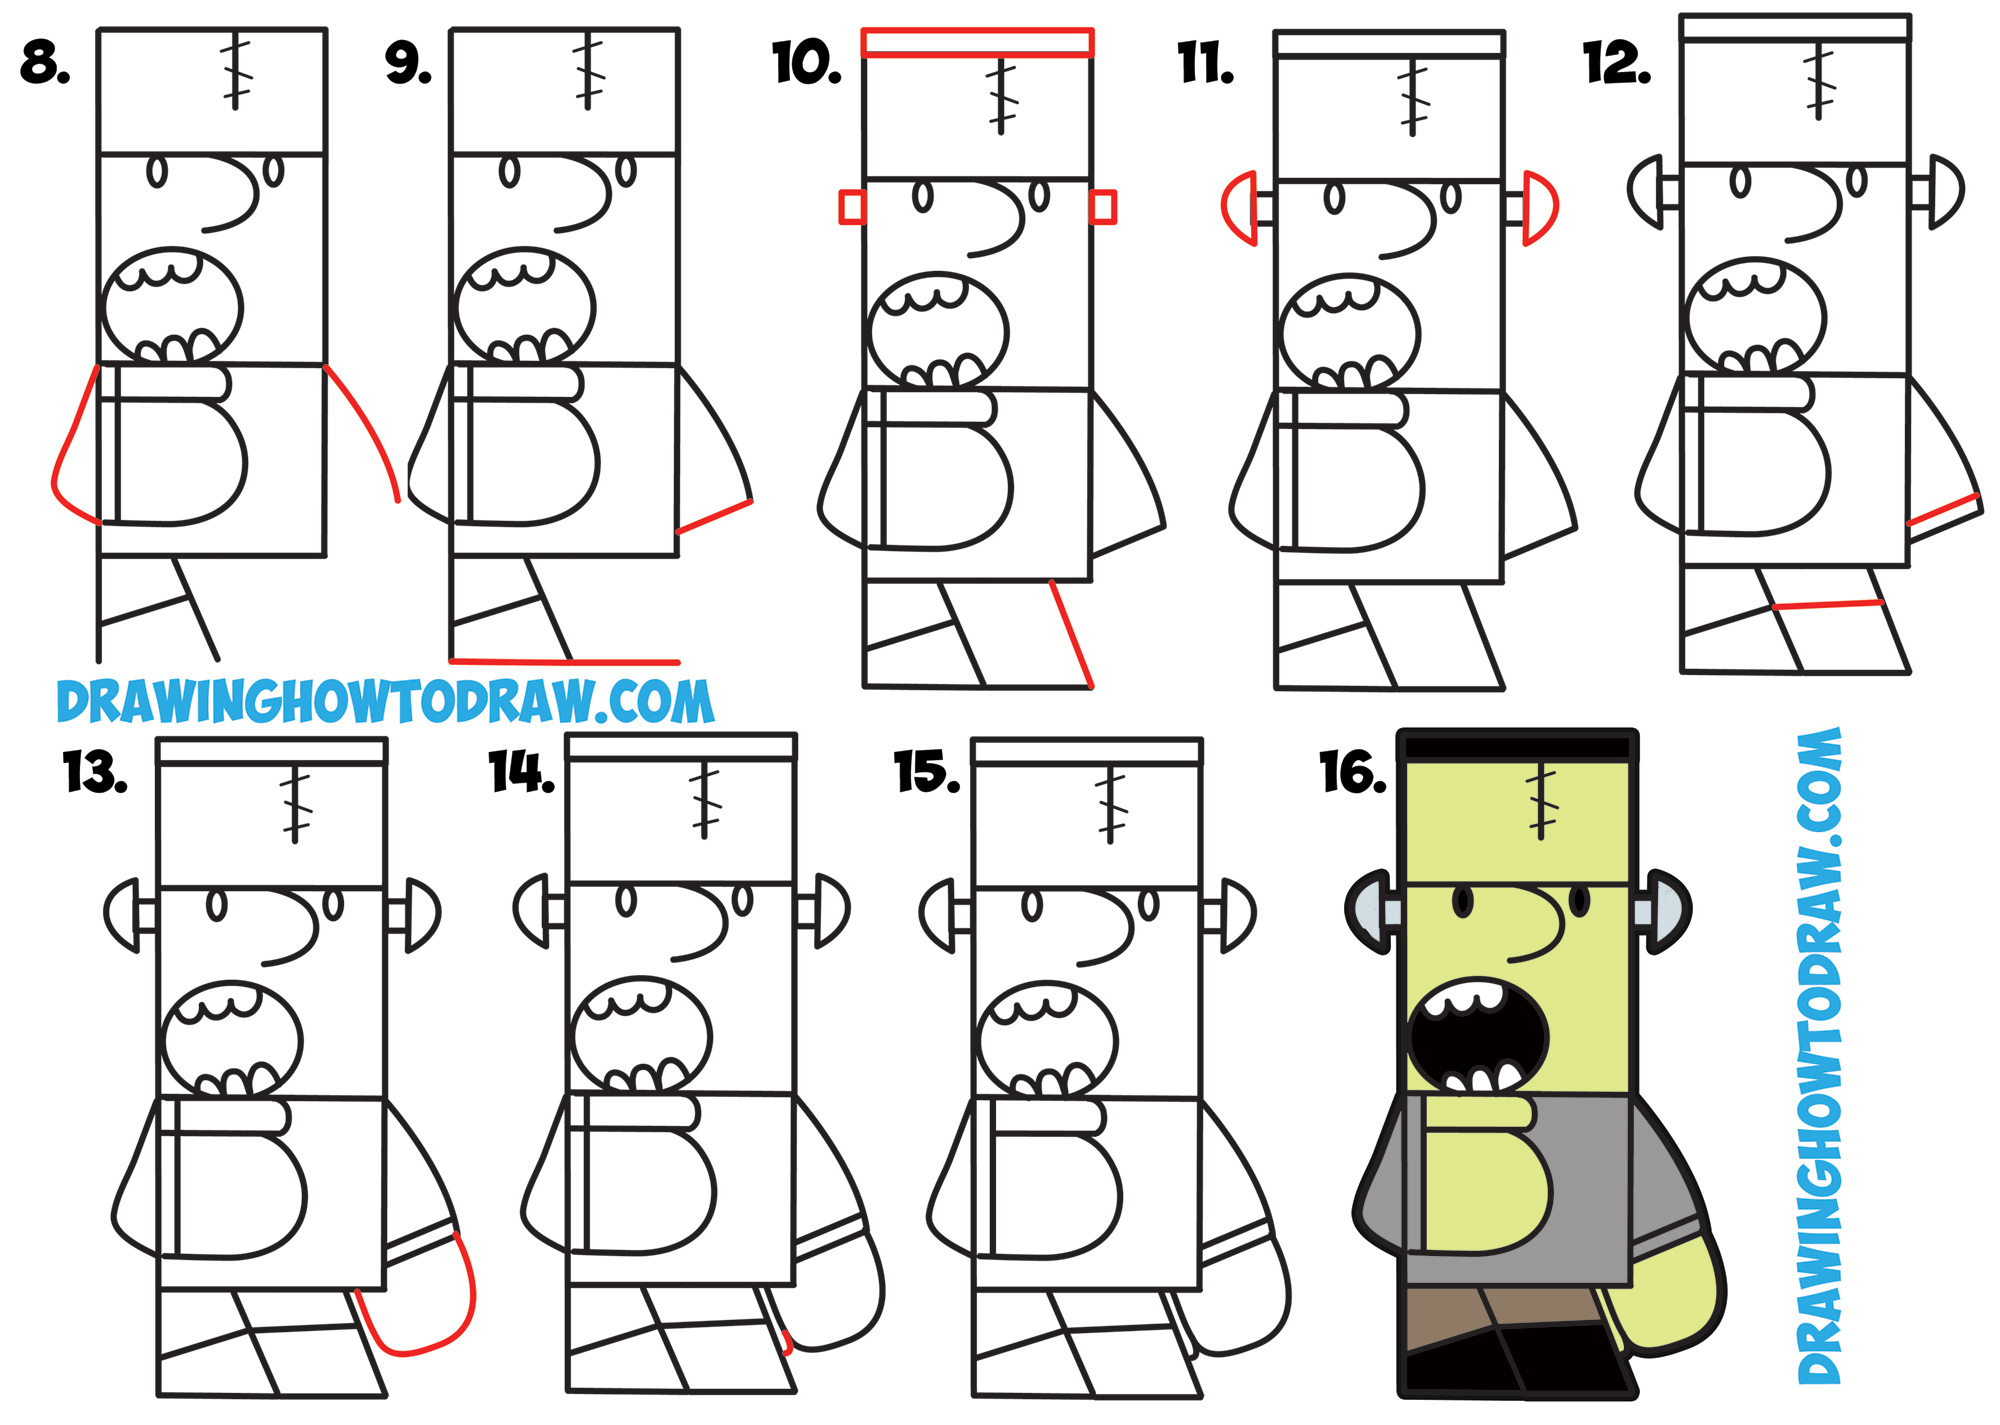 How to Draw Cartoon Frankenstein's Monster from "Frank" Word Cartoons